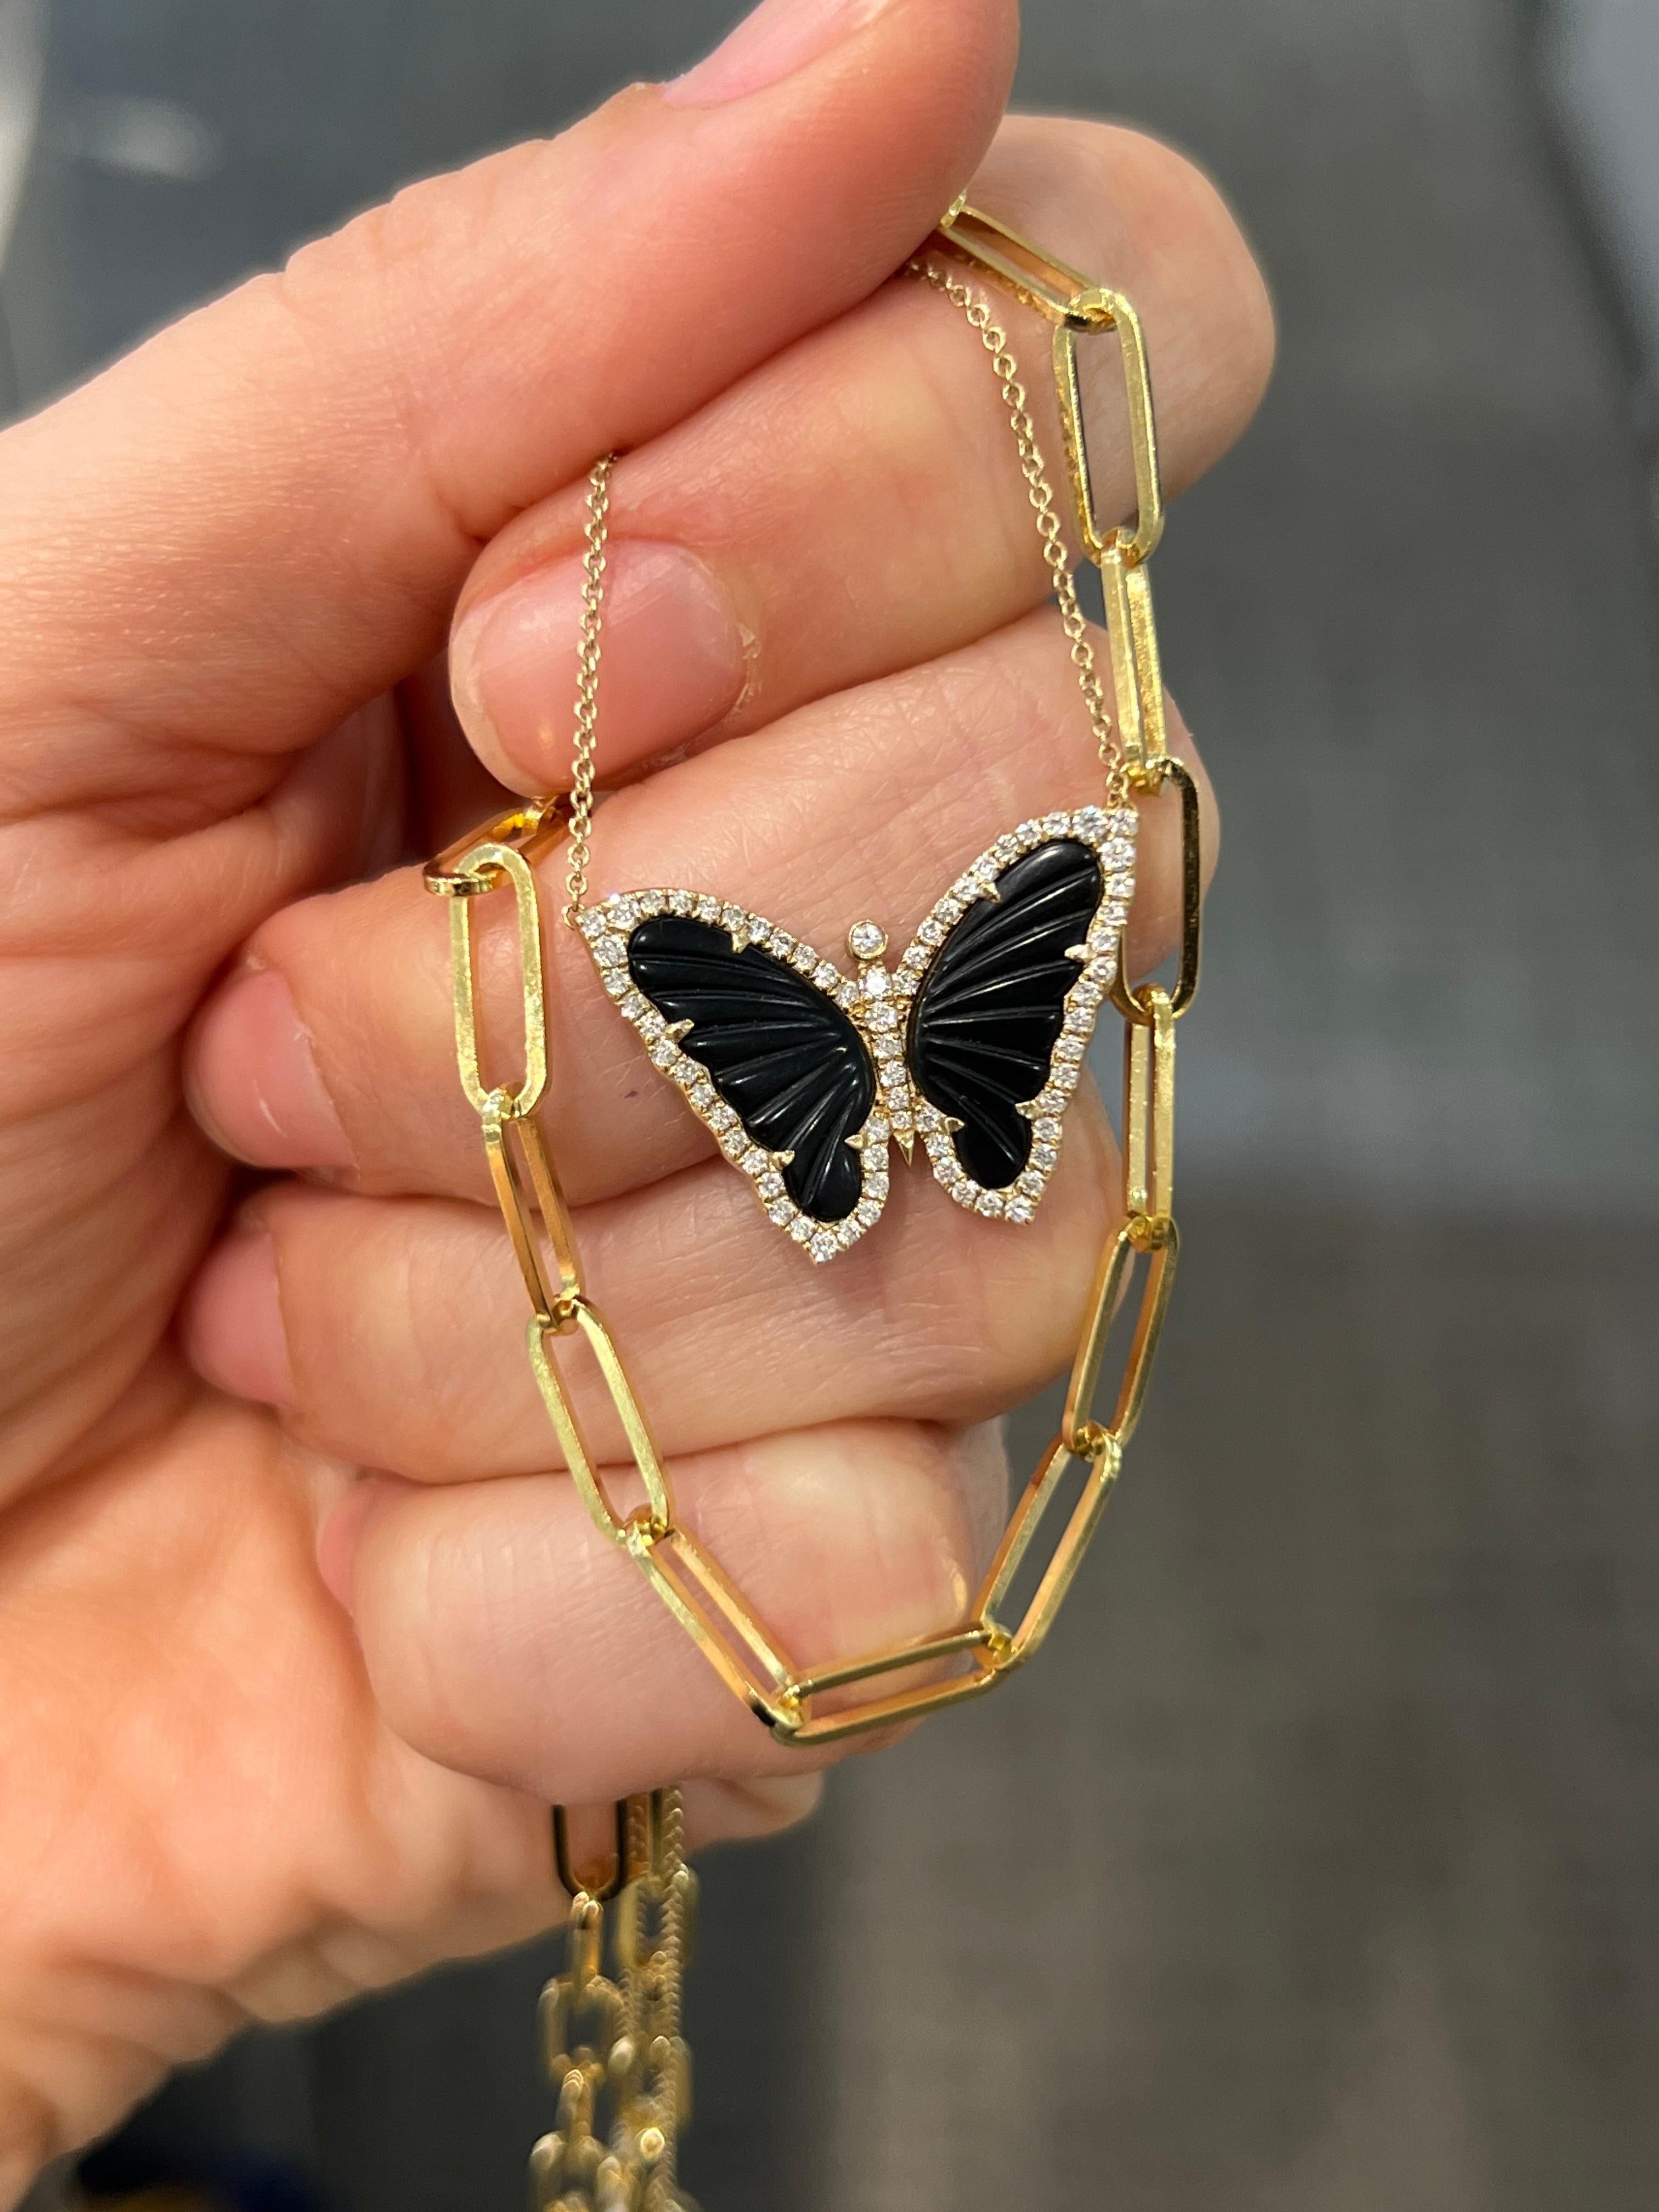 Ah, black winged butterflies, the mysterious little creatures that flutter around us in the summertime. They seem to be everywhere, having fun and living life to the fullest! 

14K yellow gold and diamond butterfly pendant necklace with black onyx